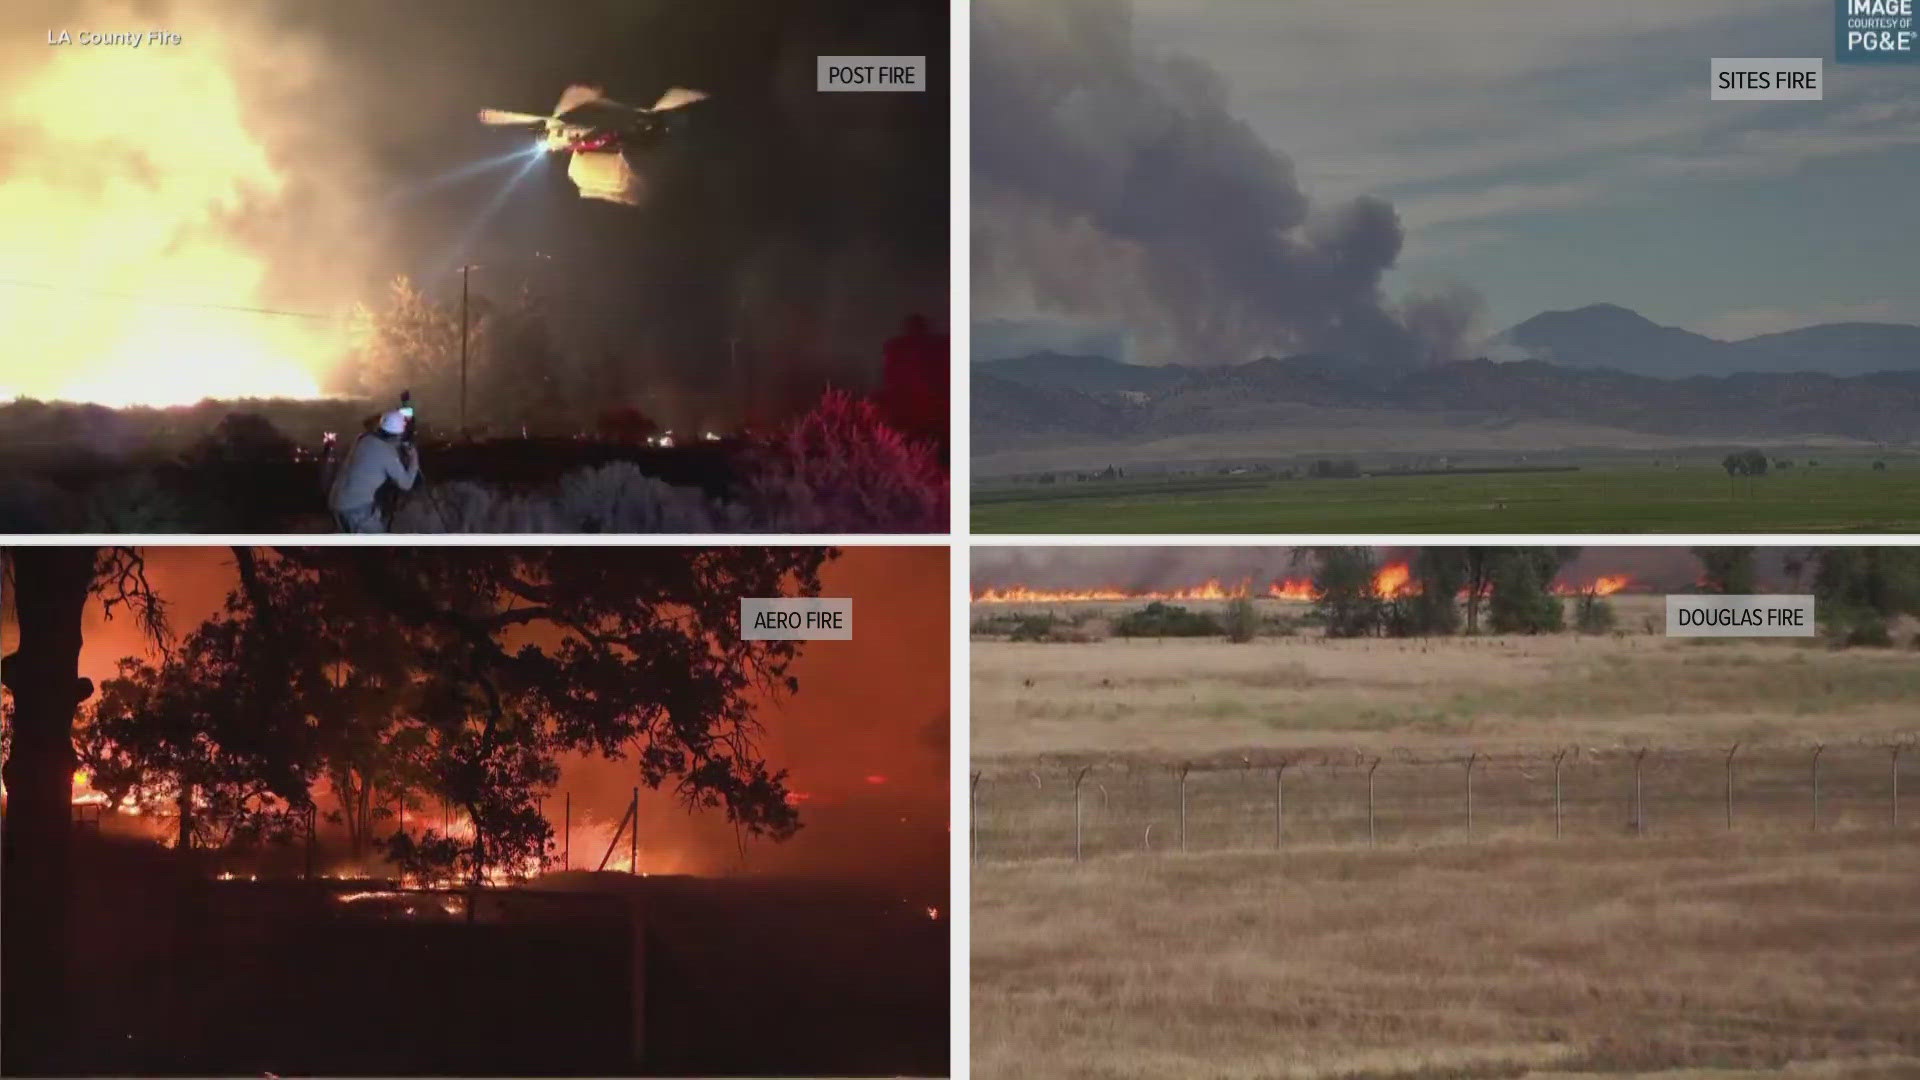 Fires are burning in Colusa County, Calaveras County and Sonoma County amid Red Flag Warning conditions.